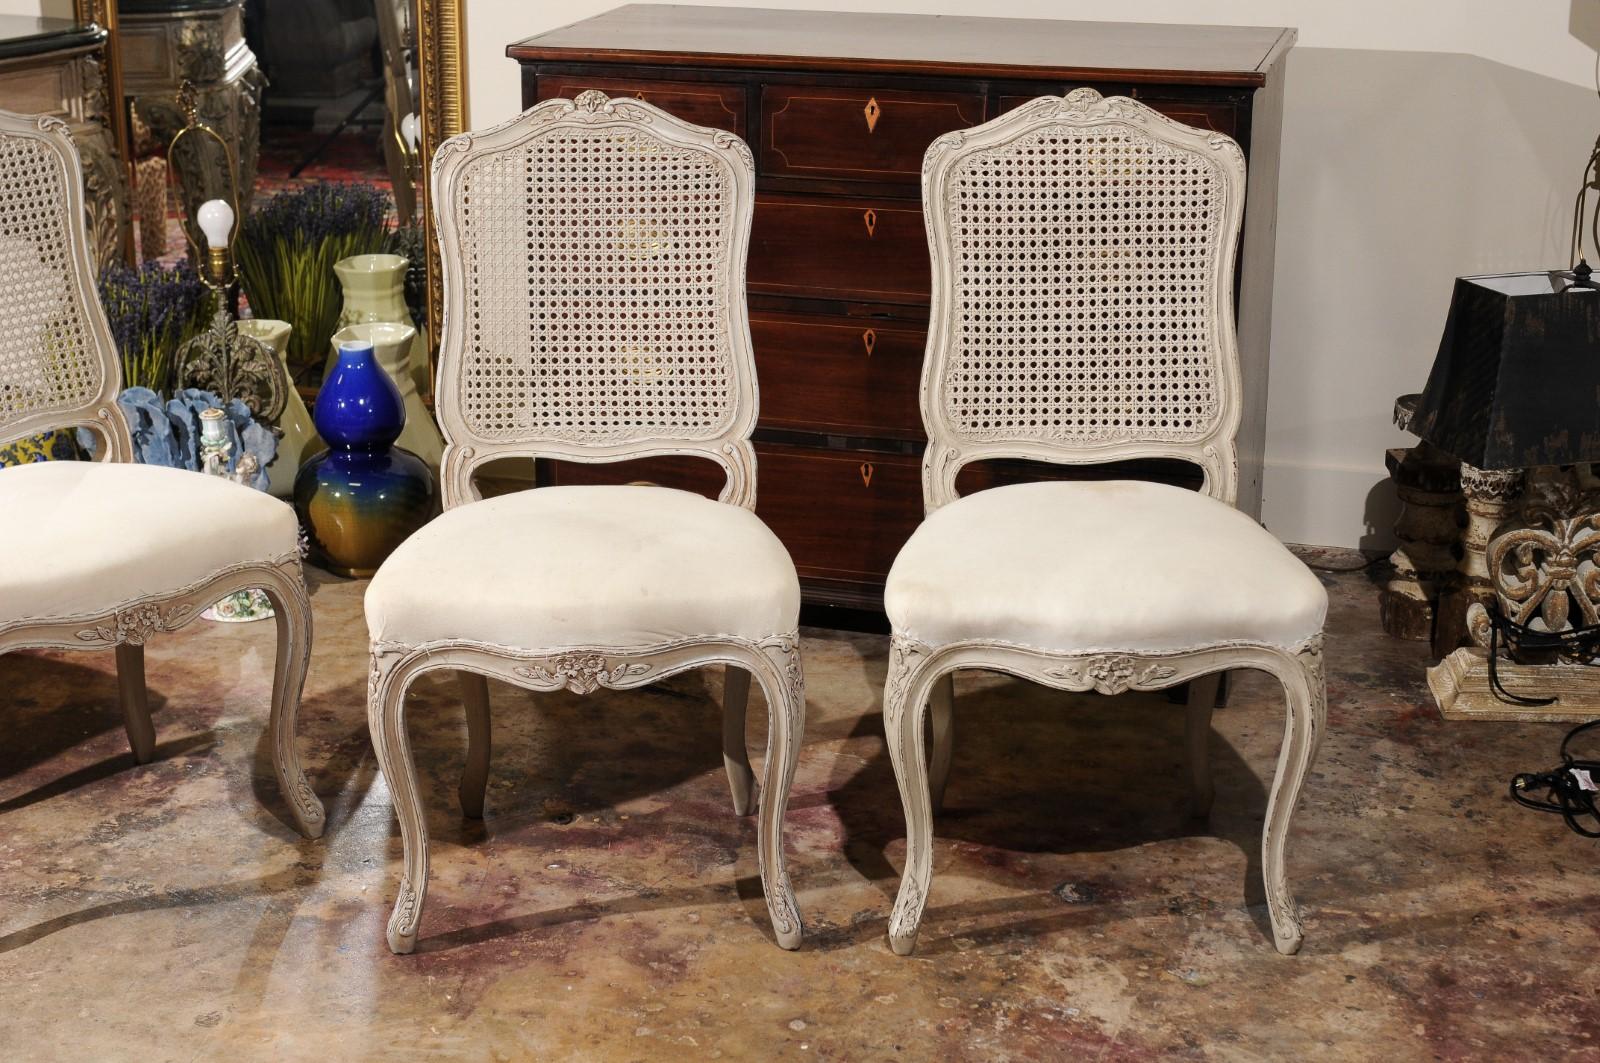 Four beautiful side chairs imported from Italy in the 1980s. They are of solid mahogany painted a grayish white color. The caned backs have carving on the top and on the cabriole legs. Perfect condition. Seats covered in muslin so will need to be